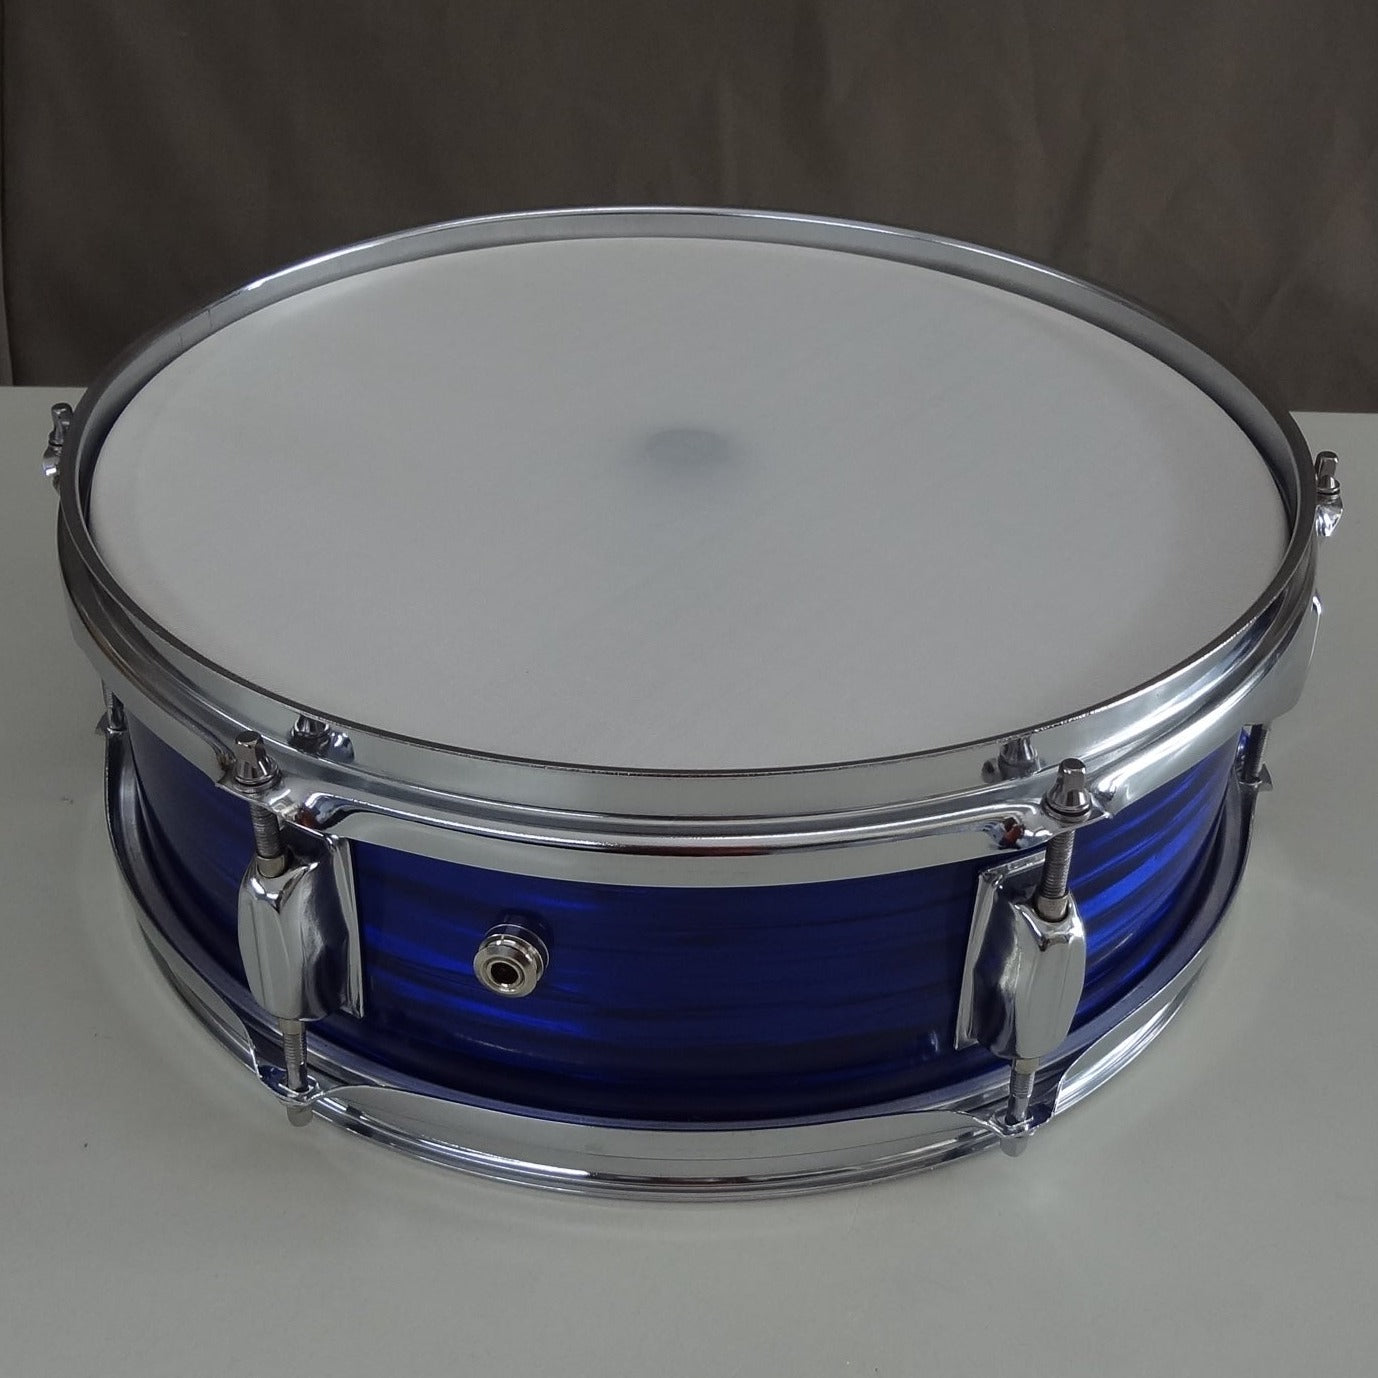 Top down alternative image of new 13 inch custom electronic snare drum blue oyster